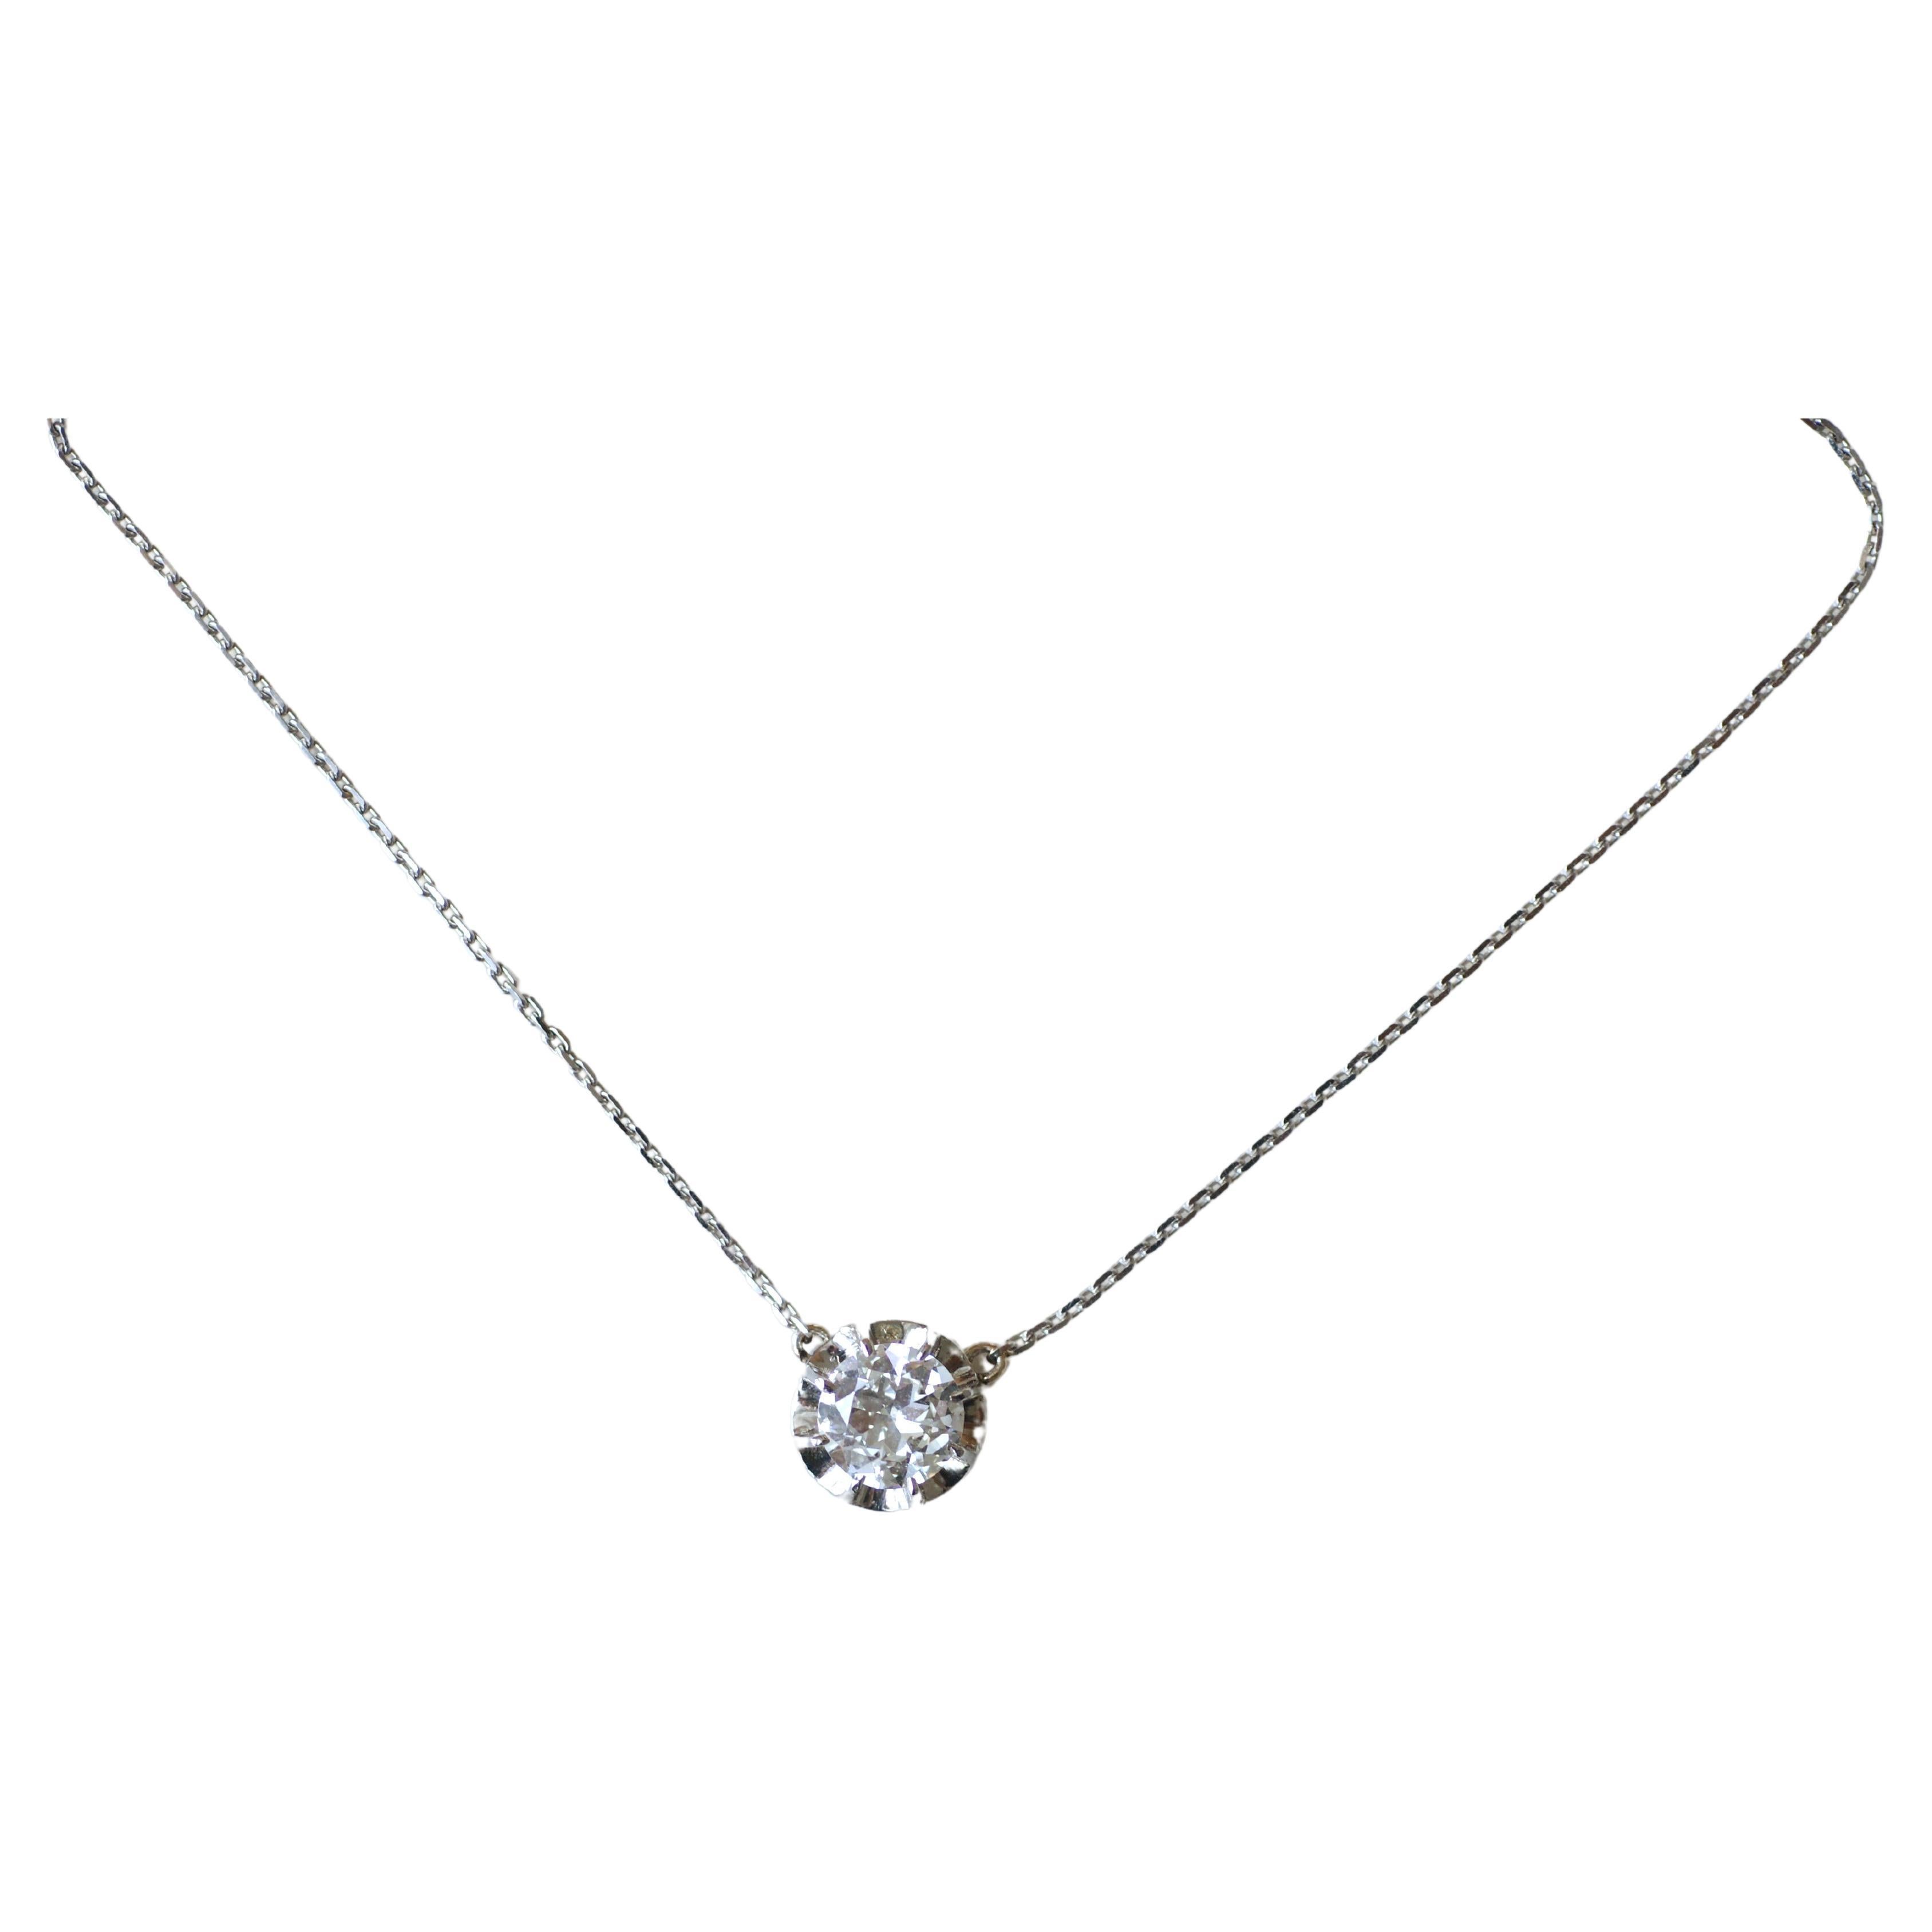 1.24cts Diamond Solitaire Necklace in 18kt White Gold, Art Deco For Sale